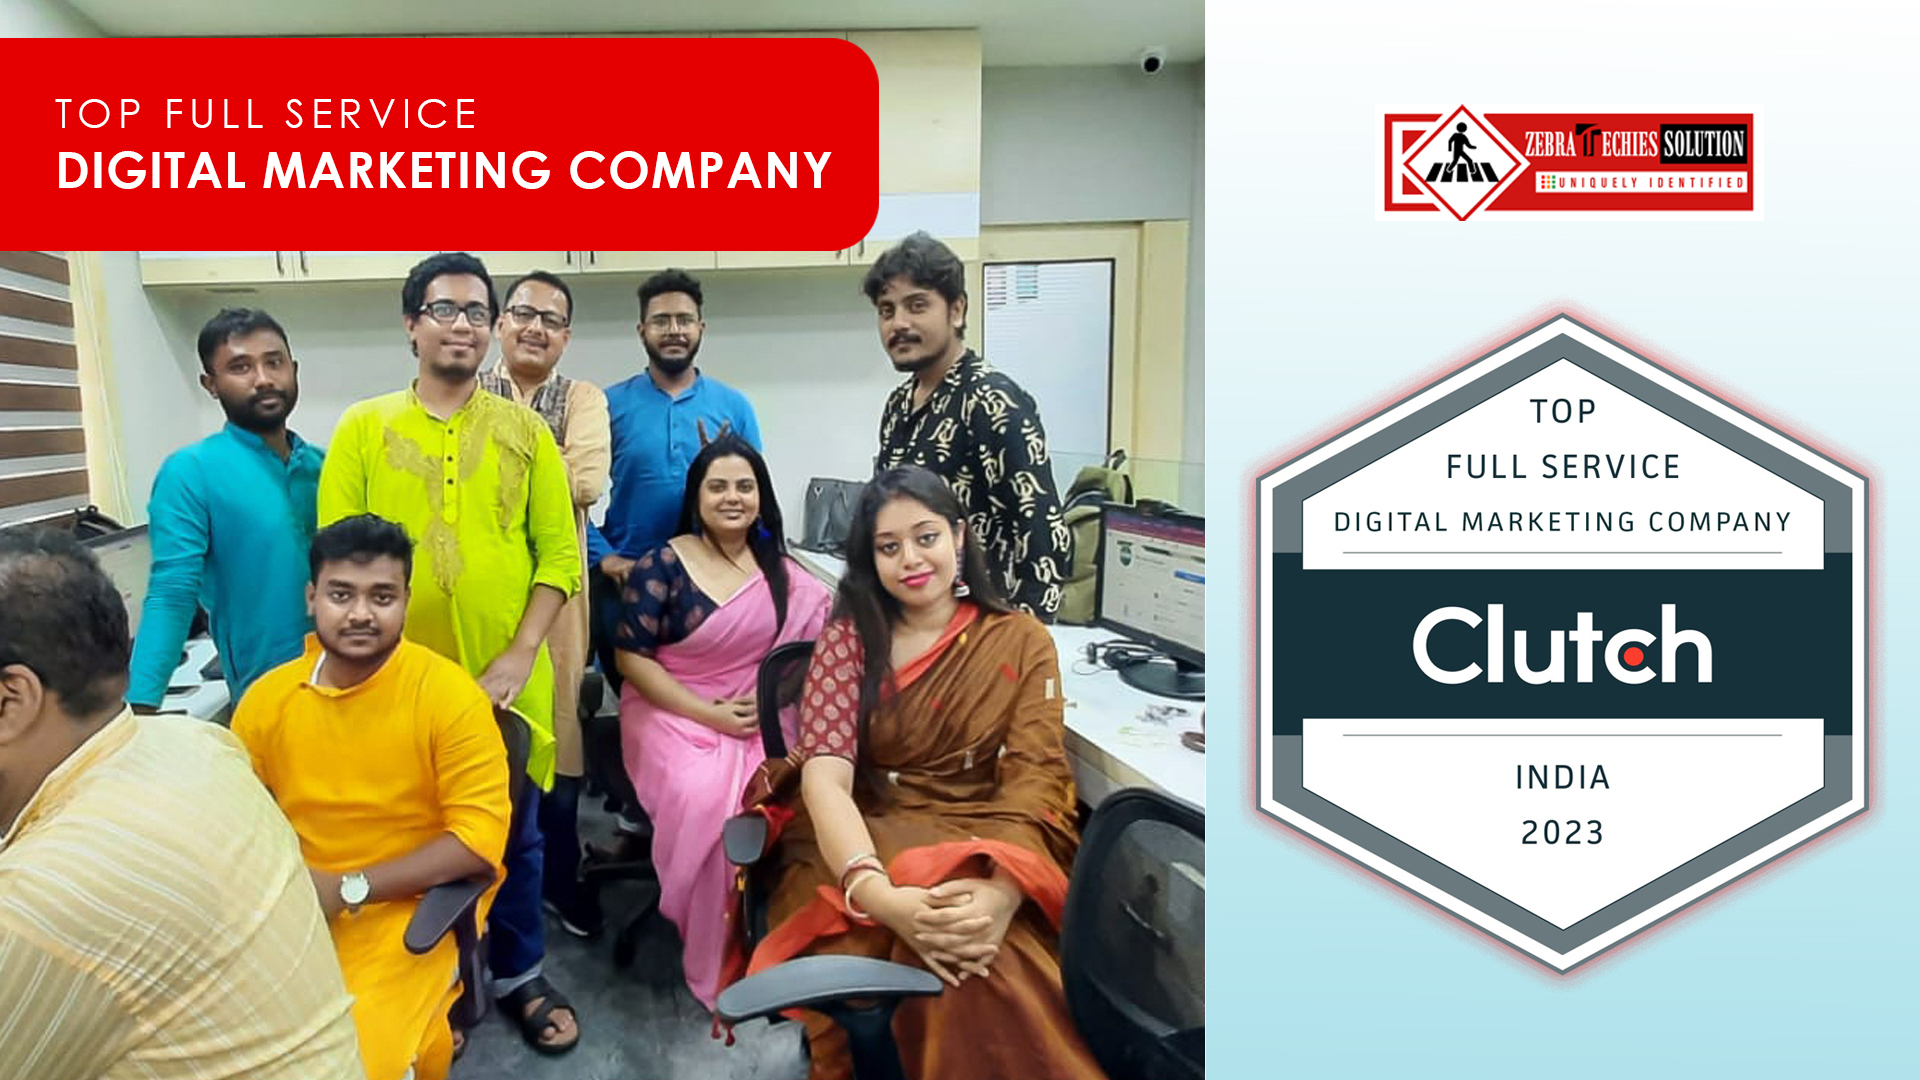 Zebra Techies Solution Ranks as the Top Full-Service Digital Marketing Company by Clutch